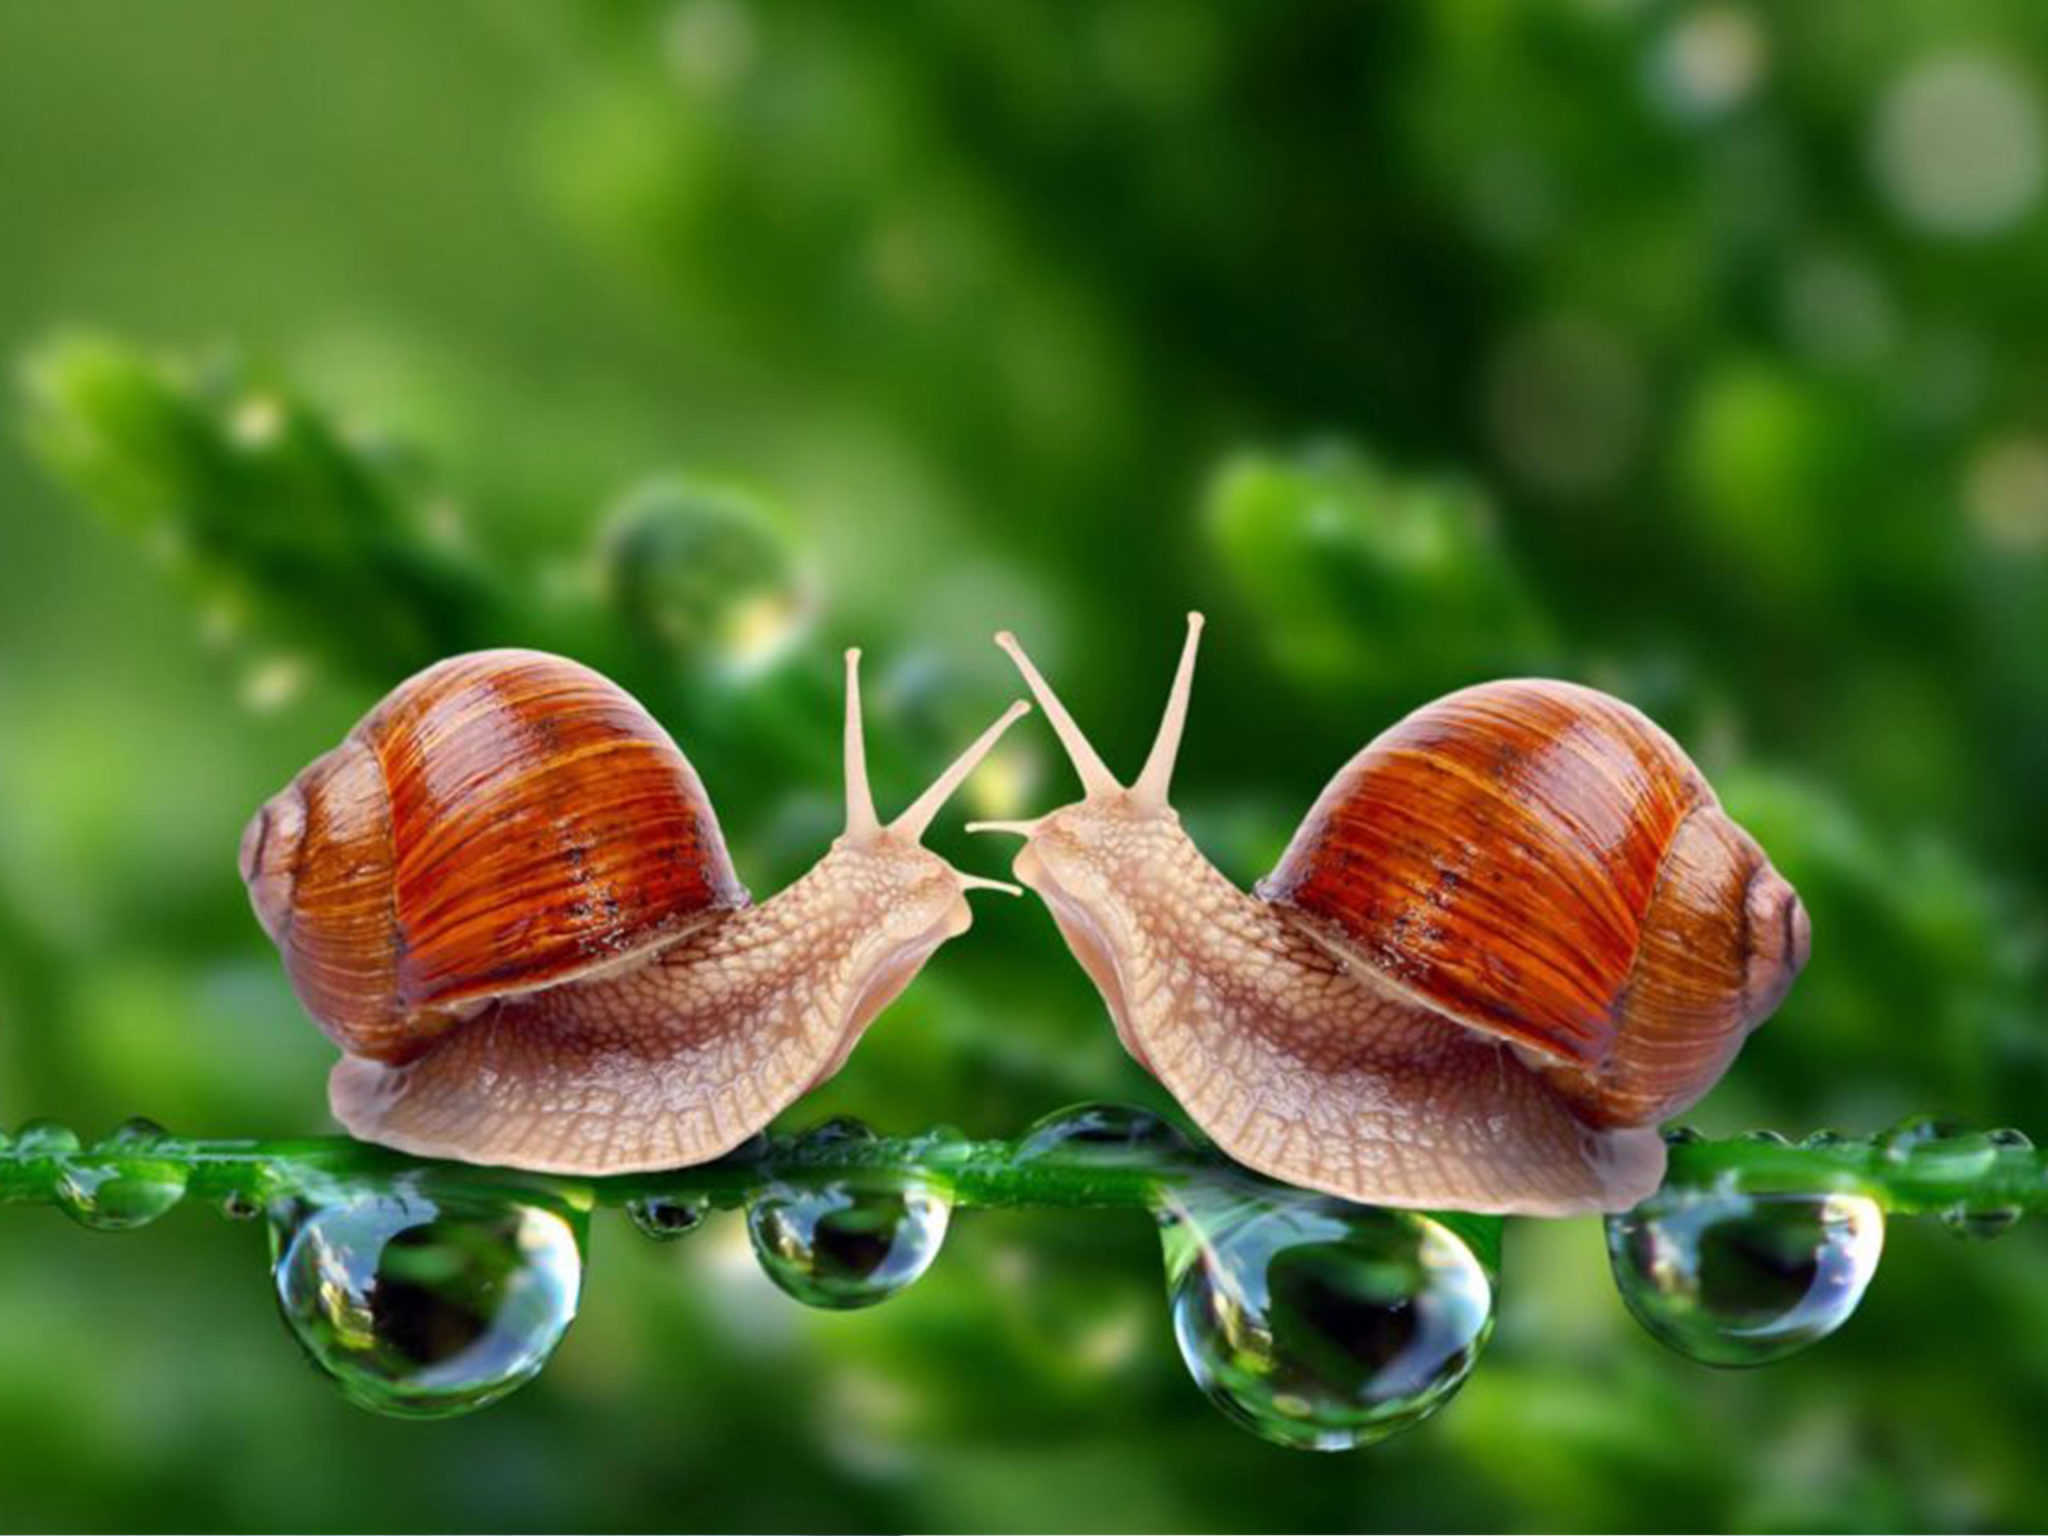 Snail Cream: What Will Happen To Your Face When You Use It?